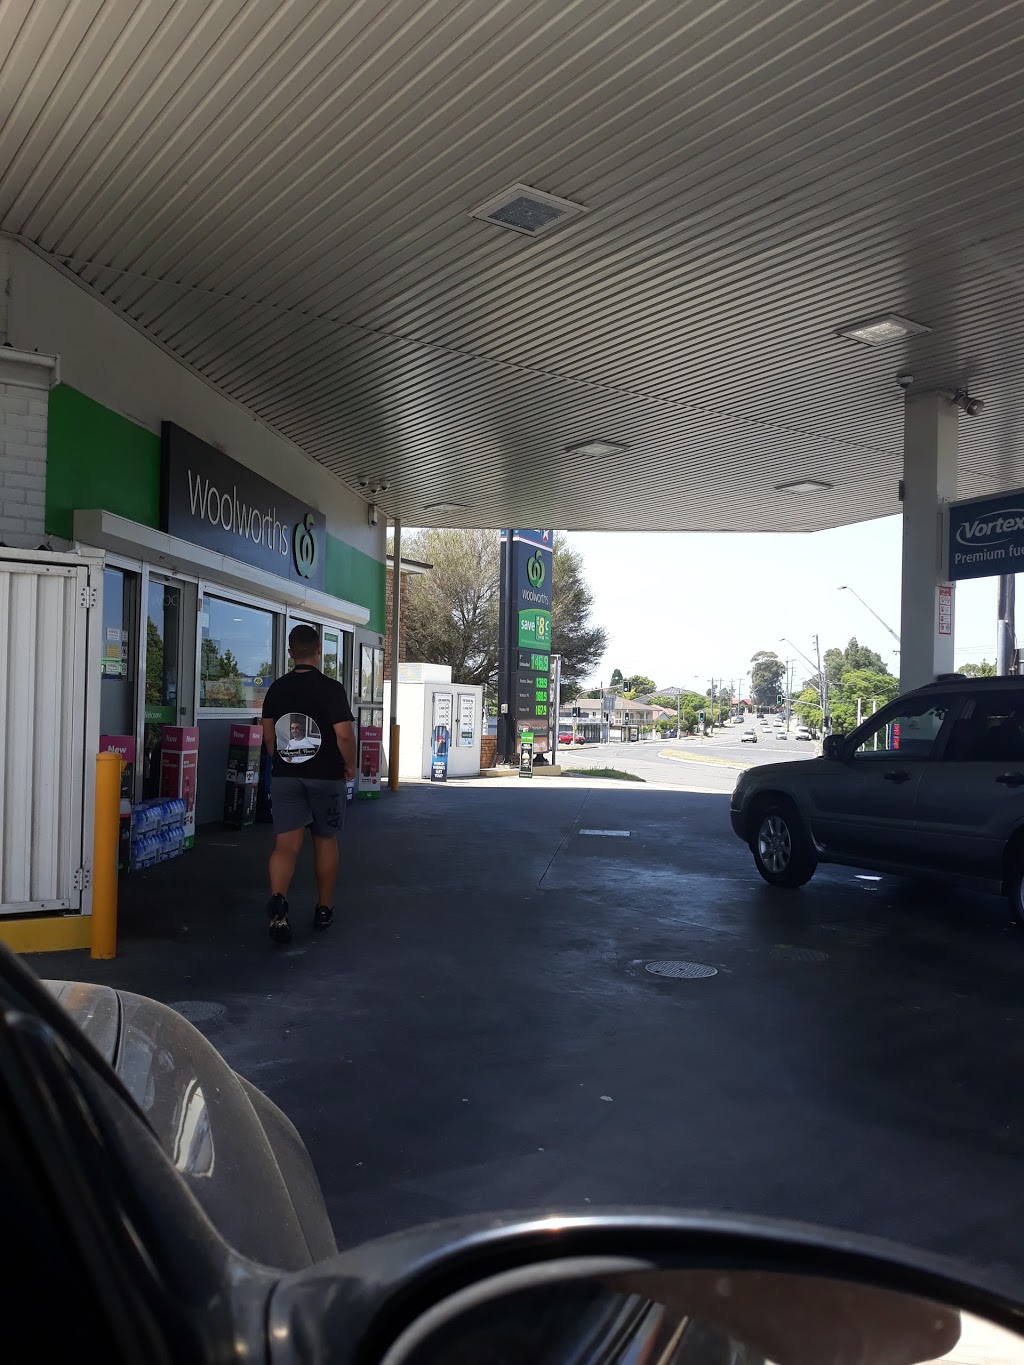 Caltex Woolworths | gas station | 742 Forest Rd, Peakhurst NSW 2210, Australia | 0295347407 OR +61 2 9534 7407